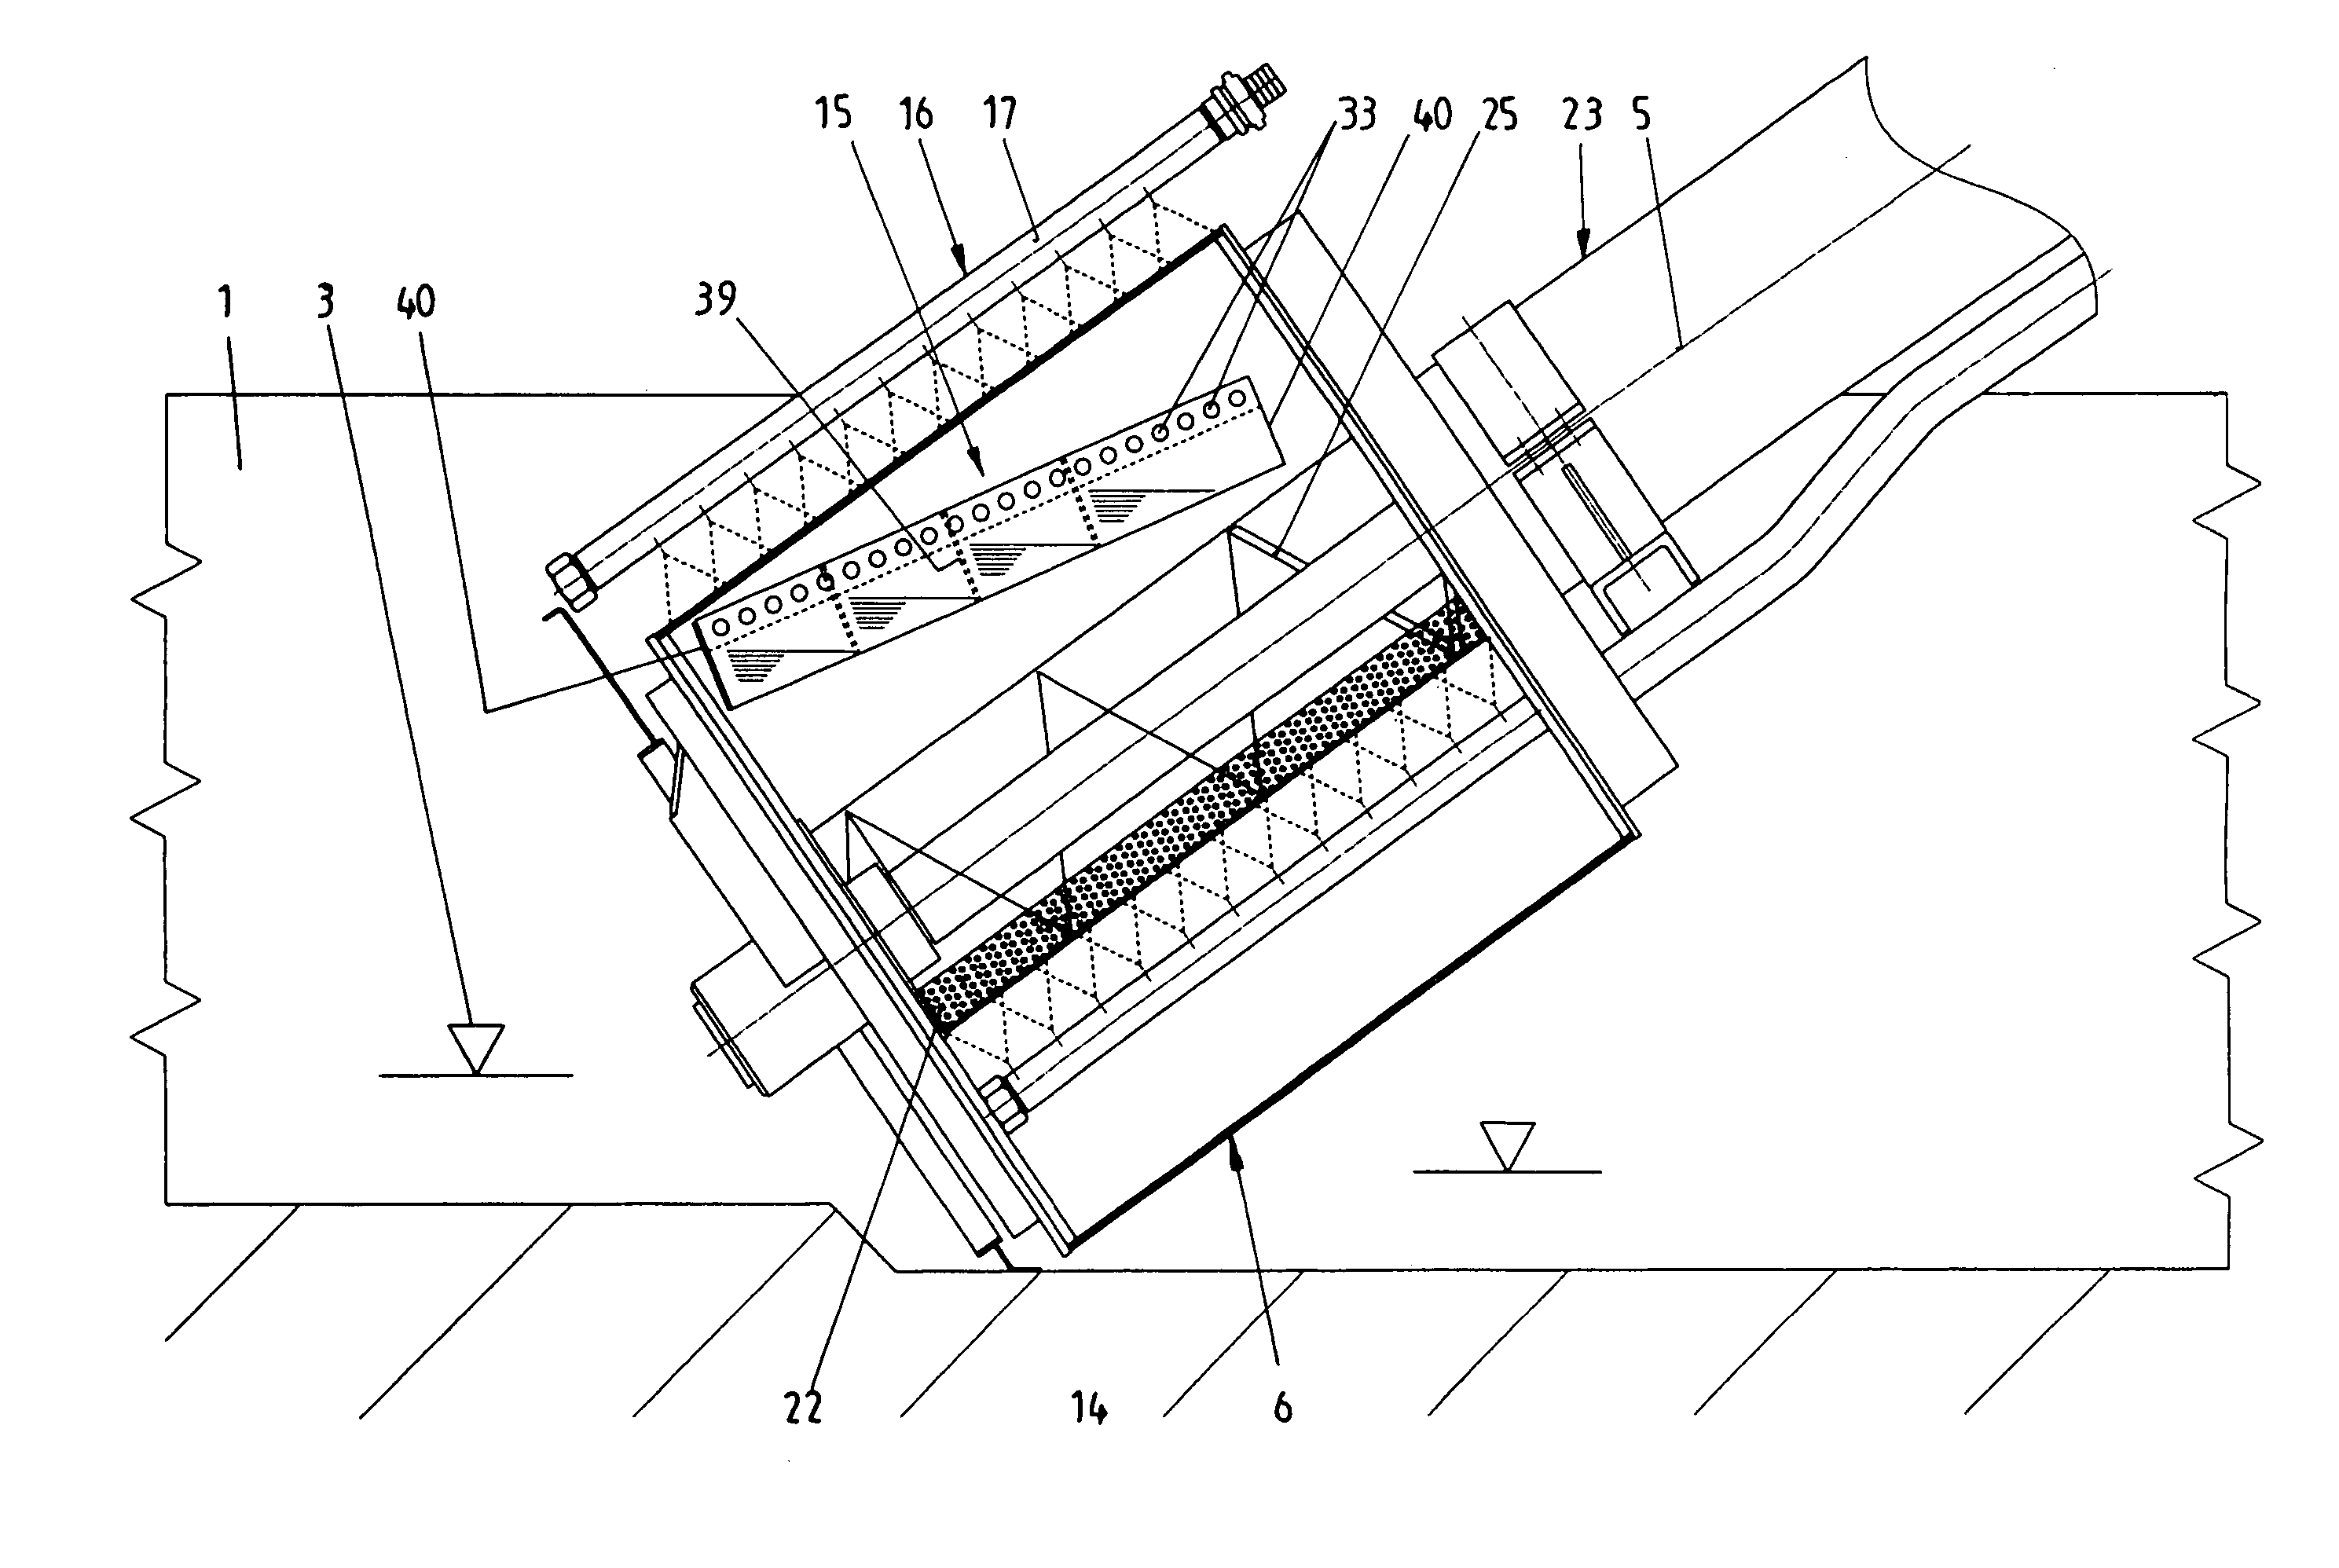 Apparatus for removing material from a liquid flowing through a channel